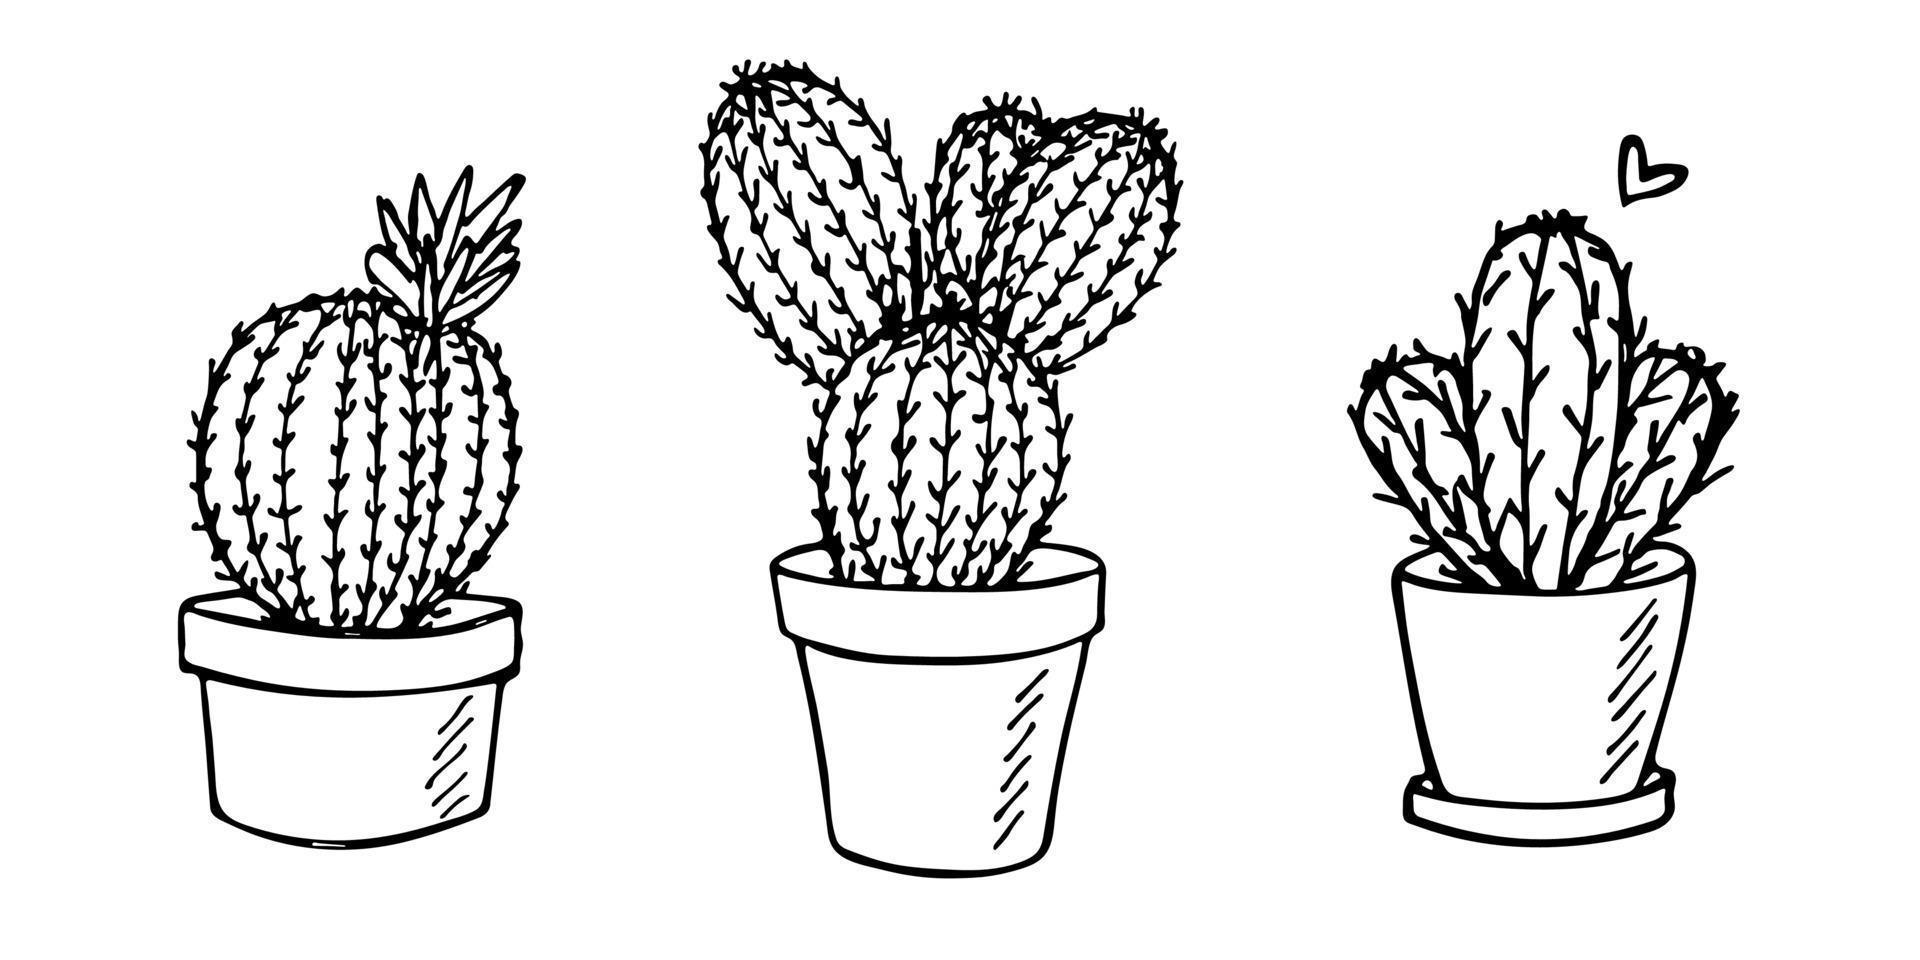 Hand Drawn Sketch of Old Man Cactus Plant Drawing by Iam Nee - Pixels